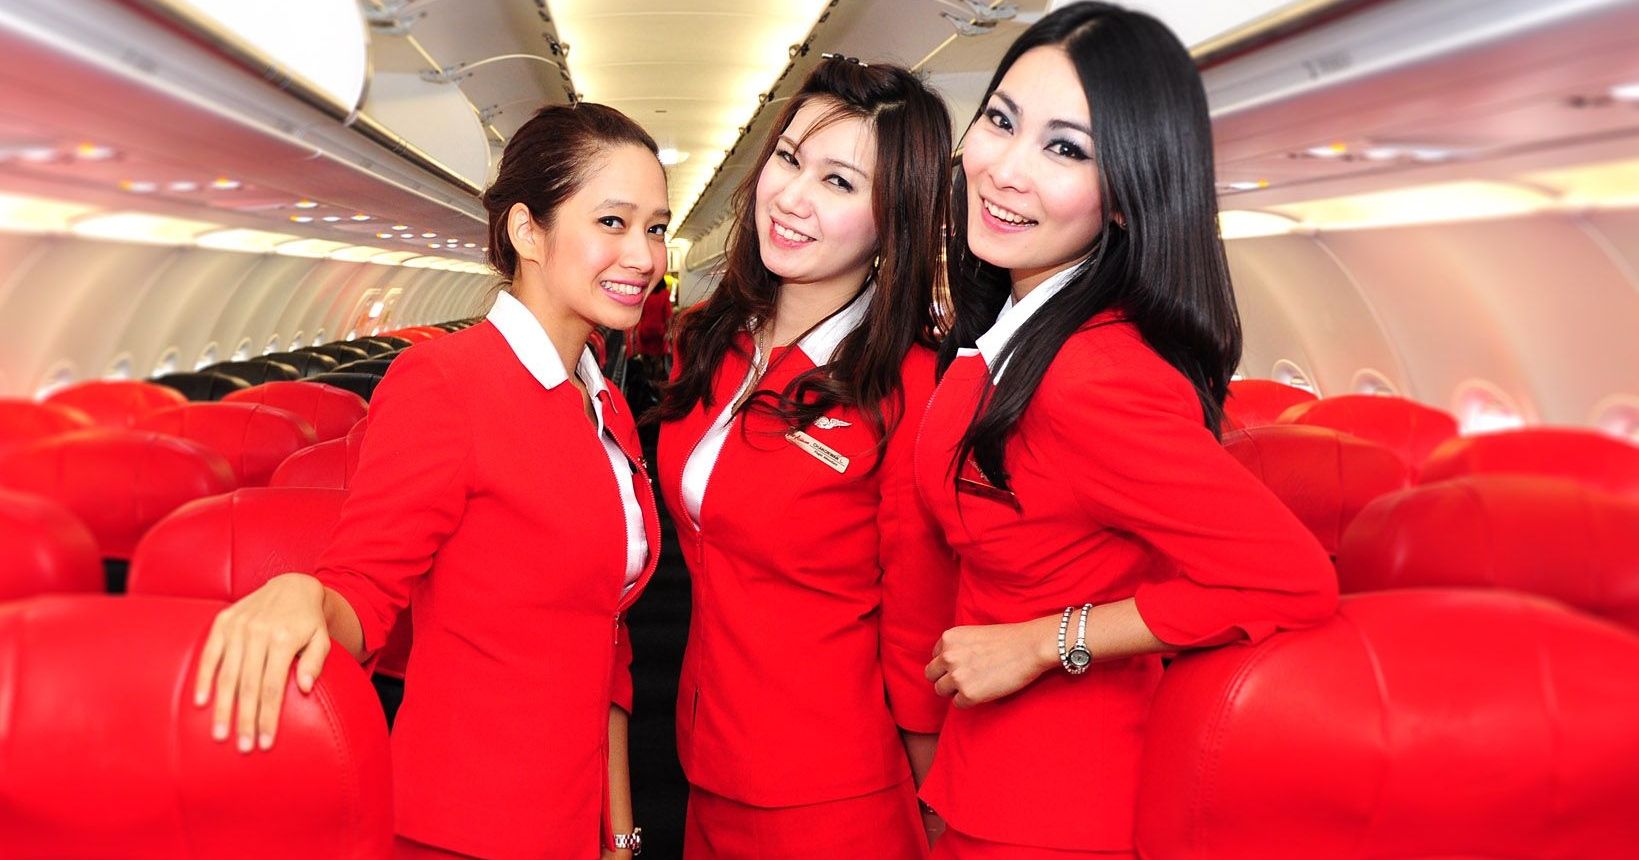 Airasia Firefly Stewardess Uniforms Are Too Sexy Politicians Say They Go Against Islam